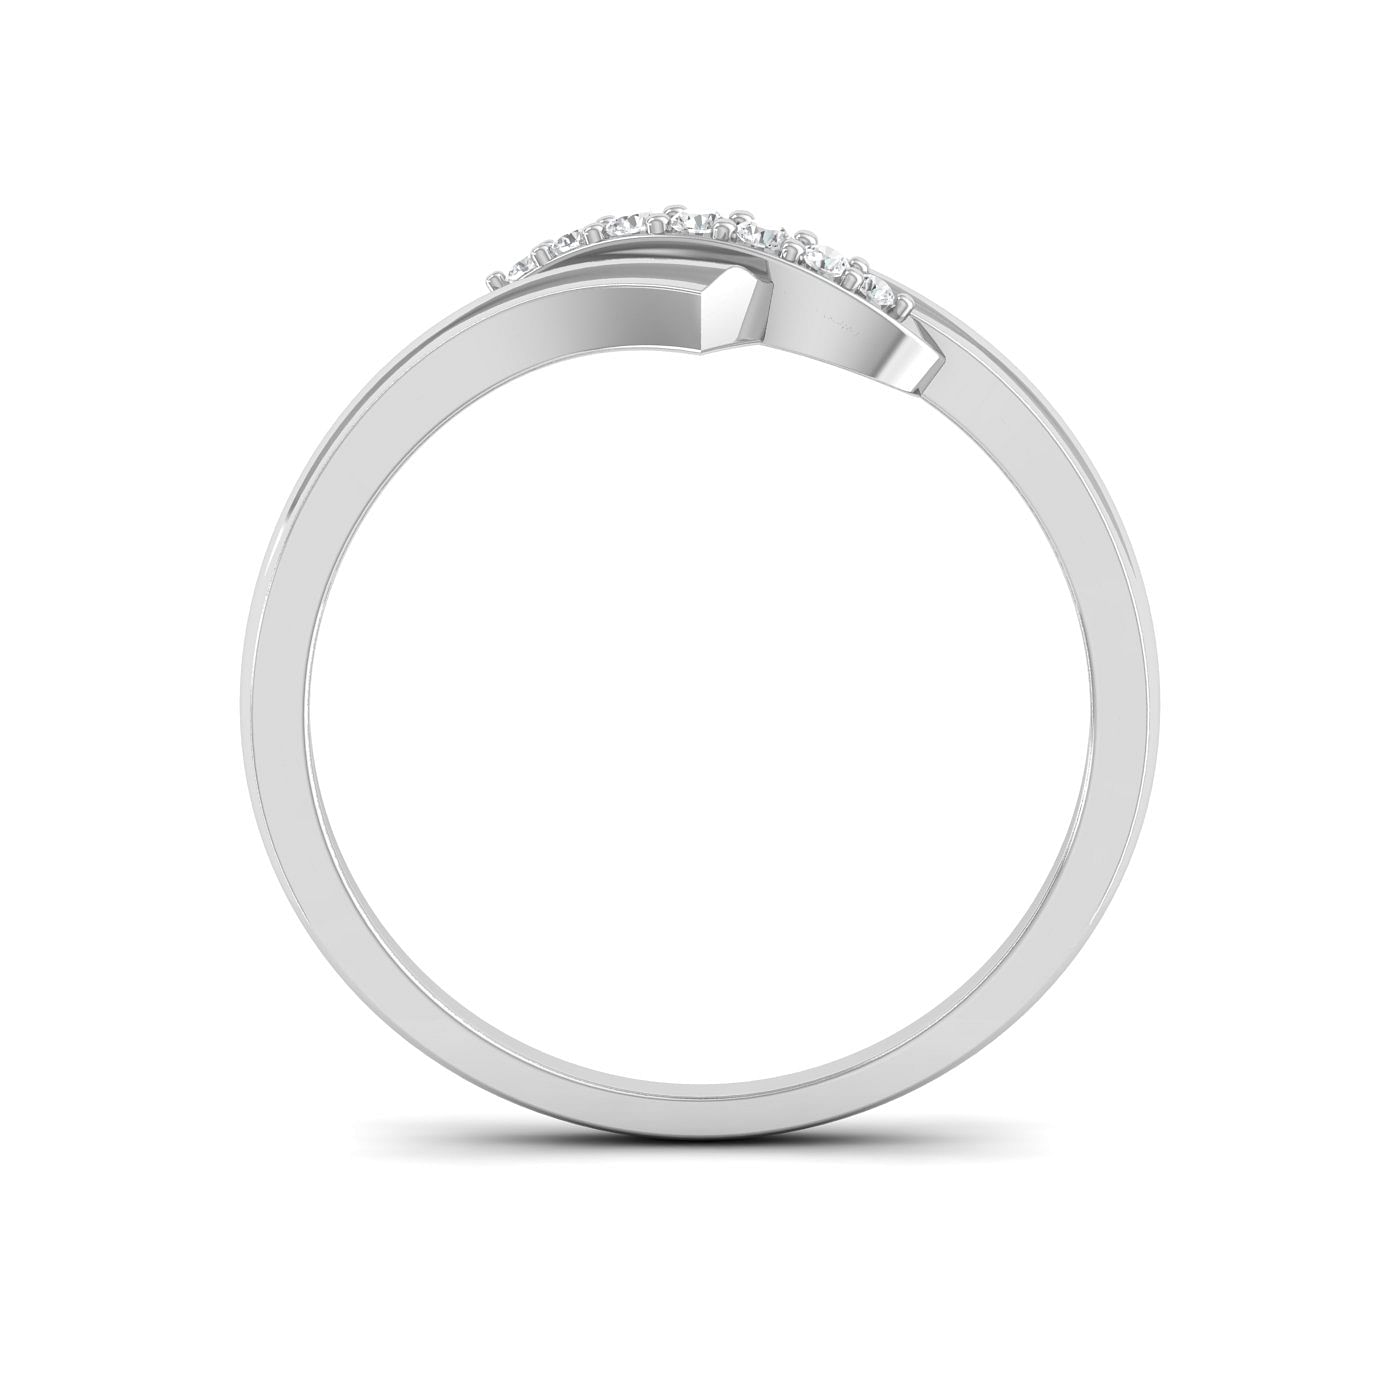 Juliette Daily Wear Diamond Ring With White Gold For Women